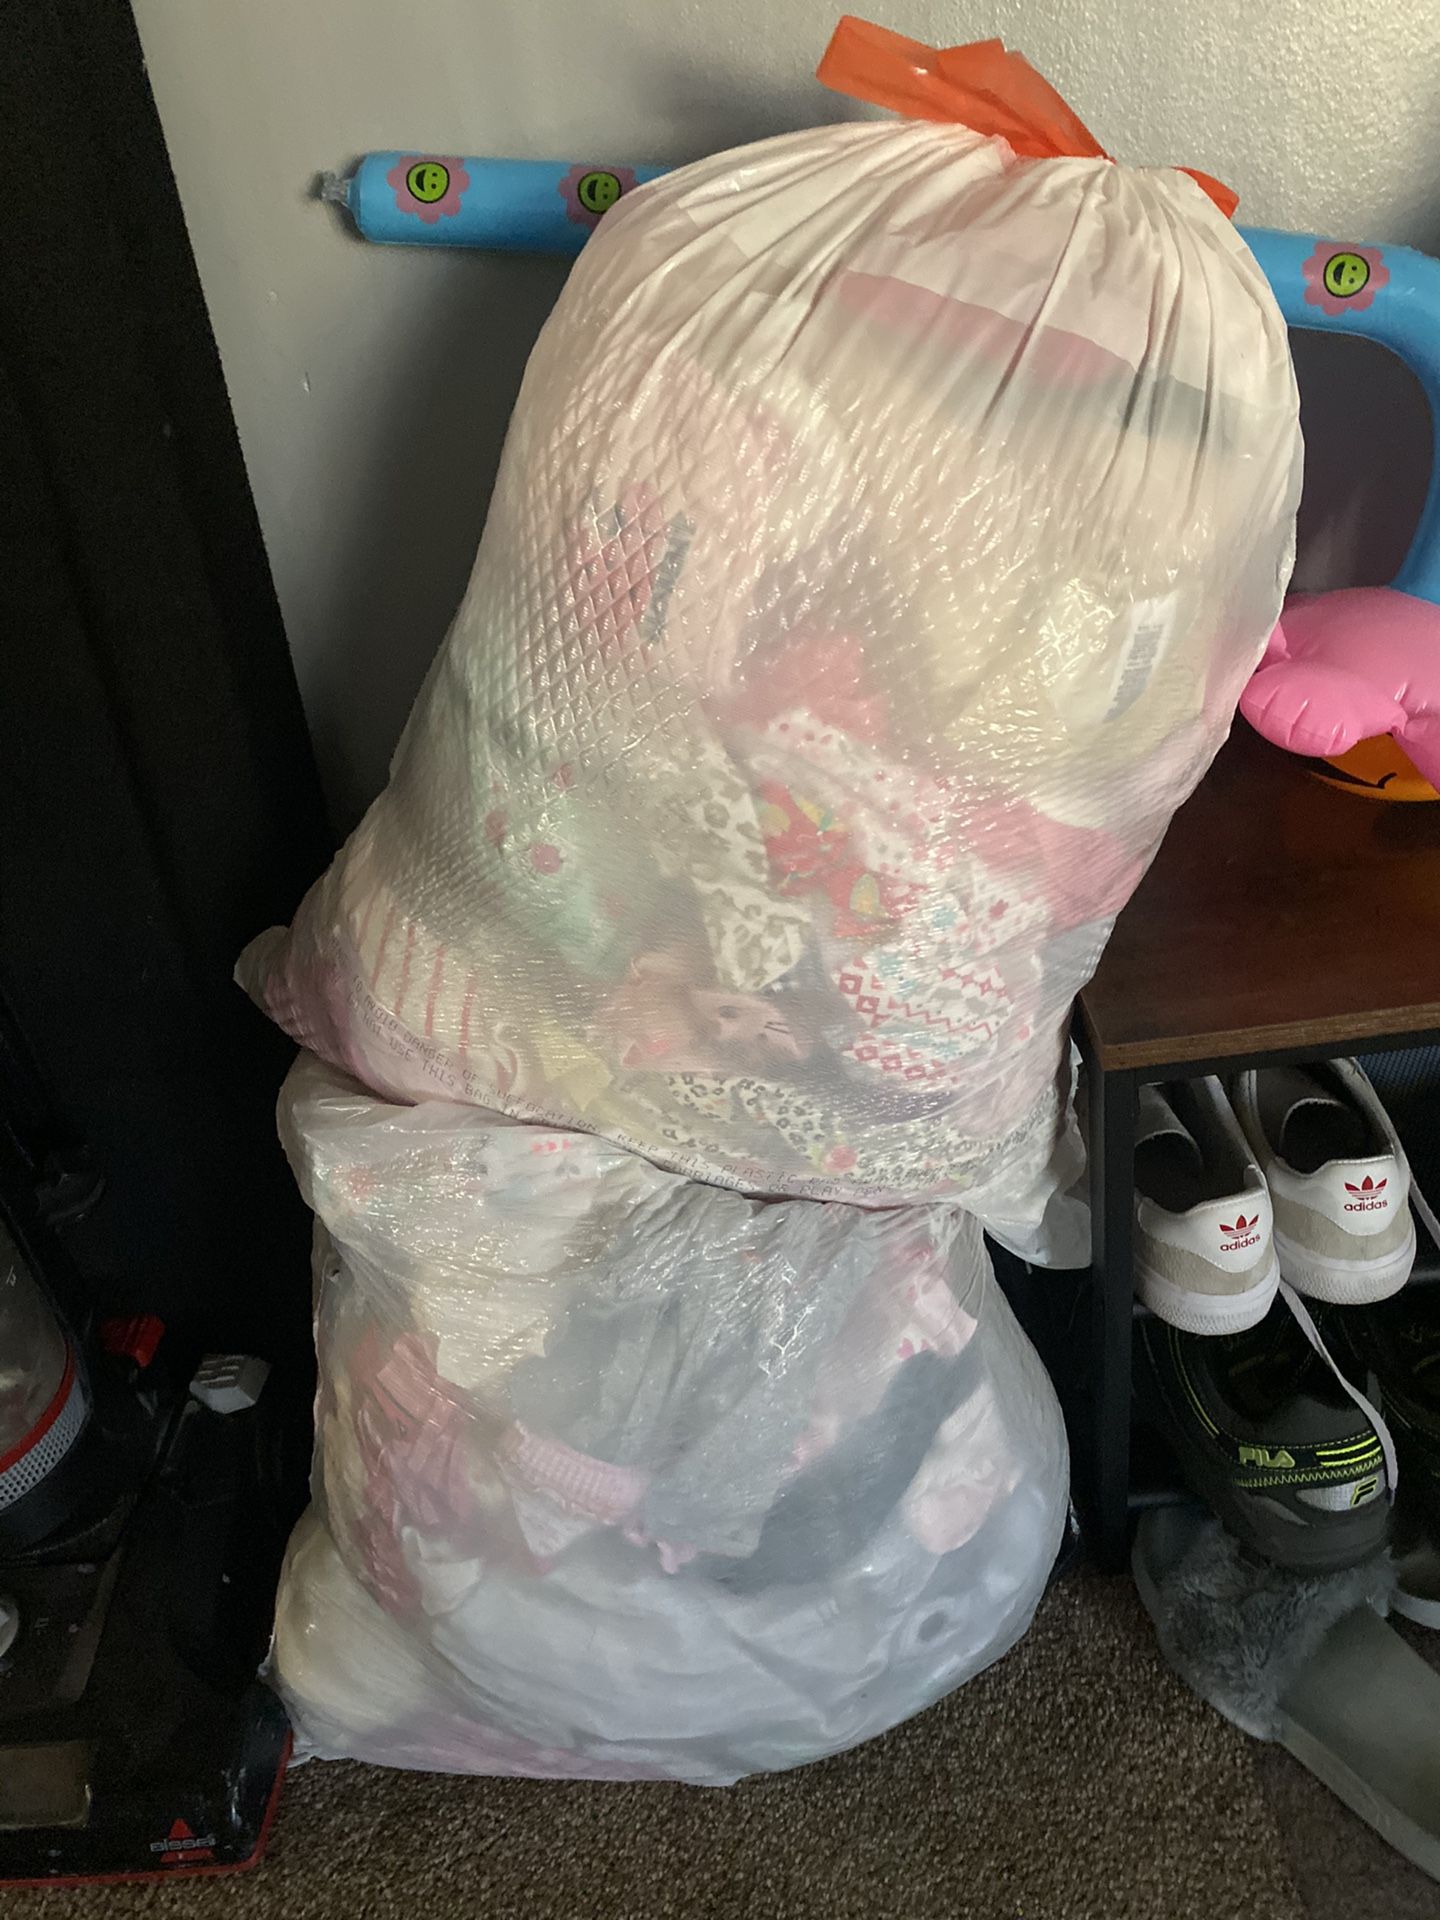 FREE BABYGIRL CLOTHES